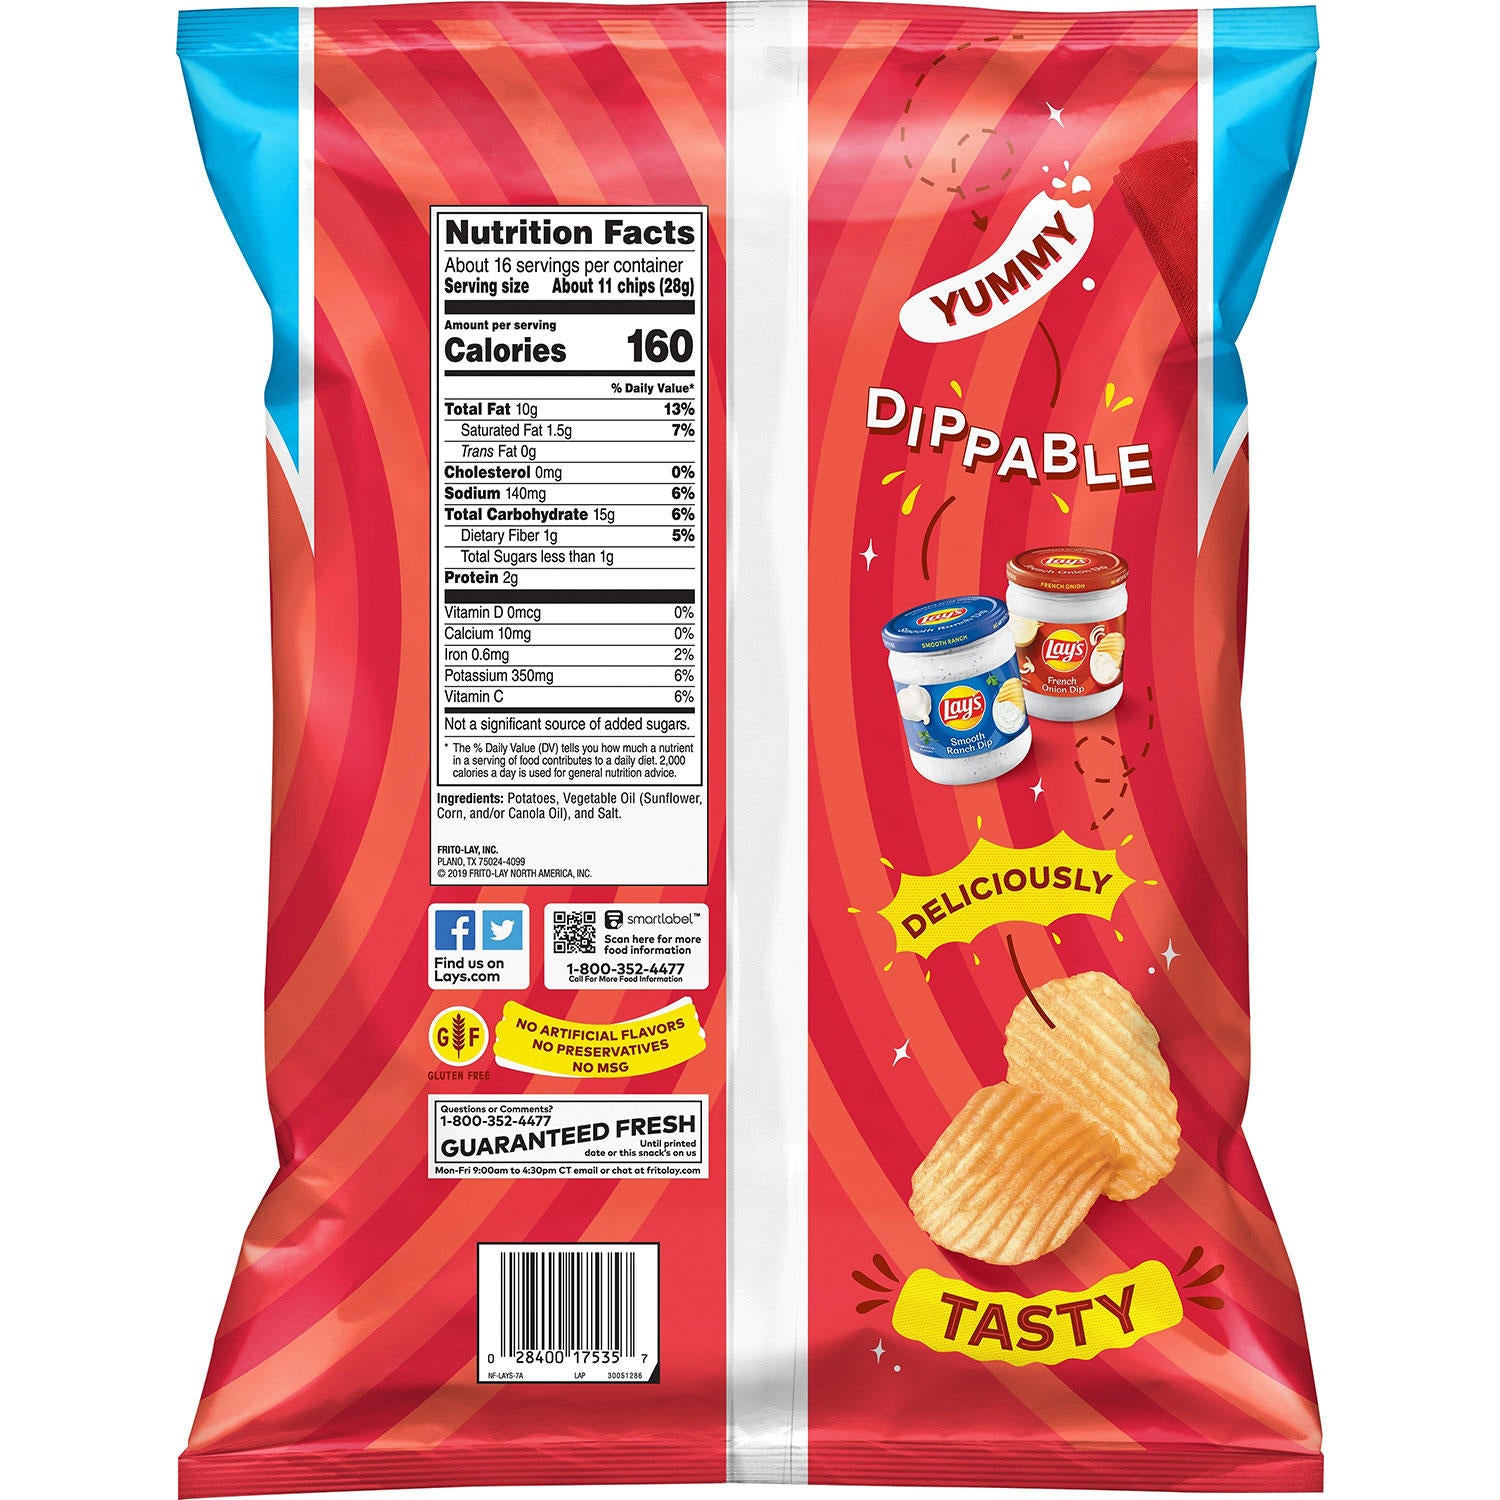   Fresh, Wavy Potato Chips, 11 Oz (Previously Happy Belly,  Packaging May Vary)